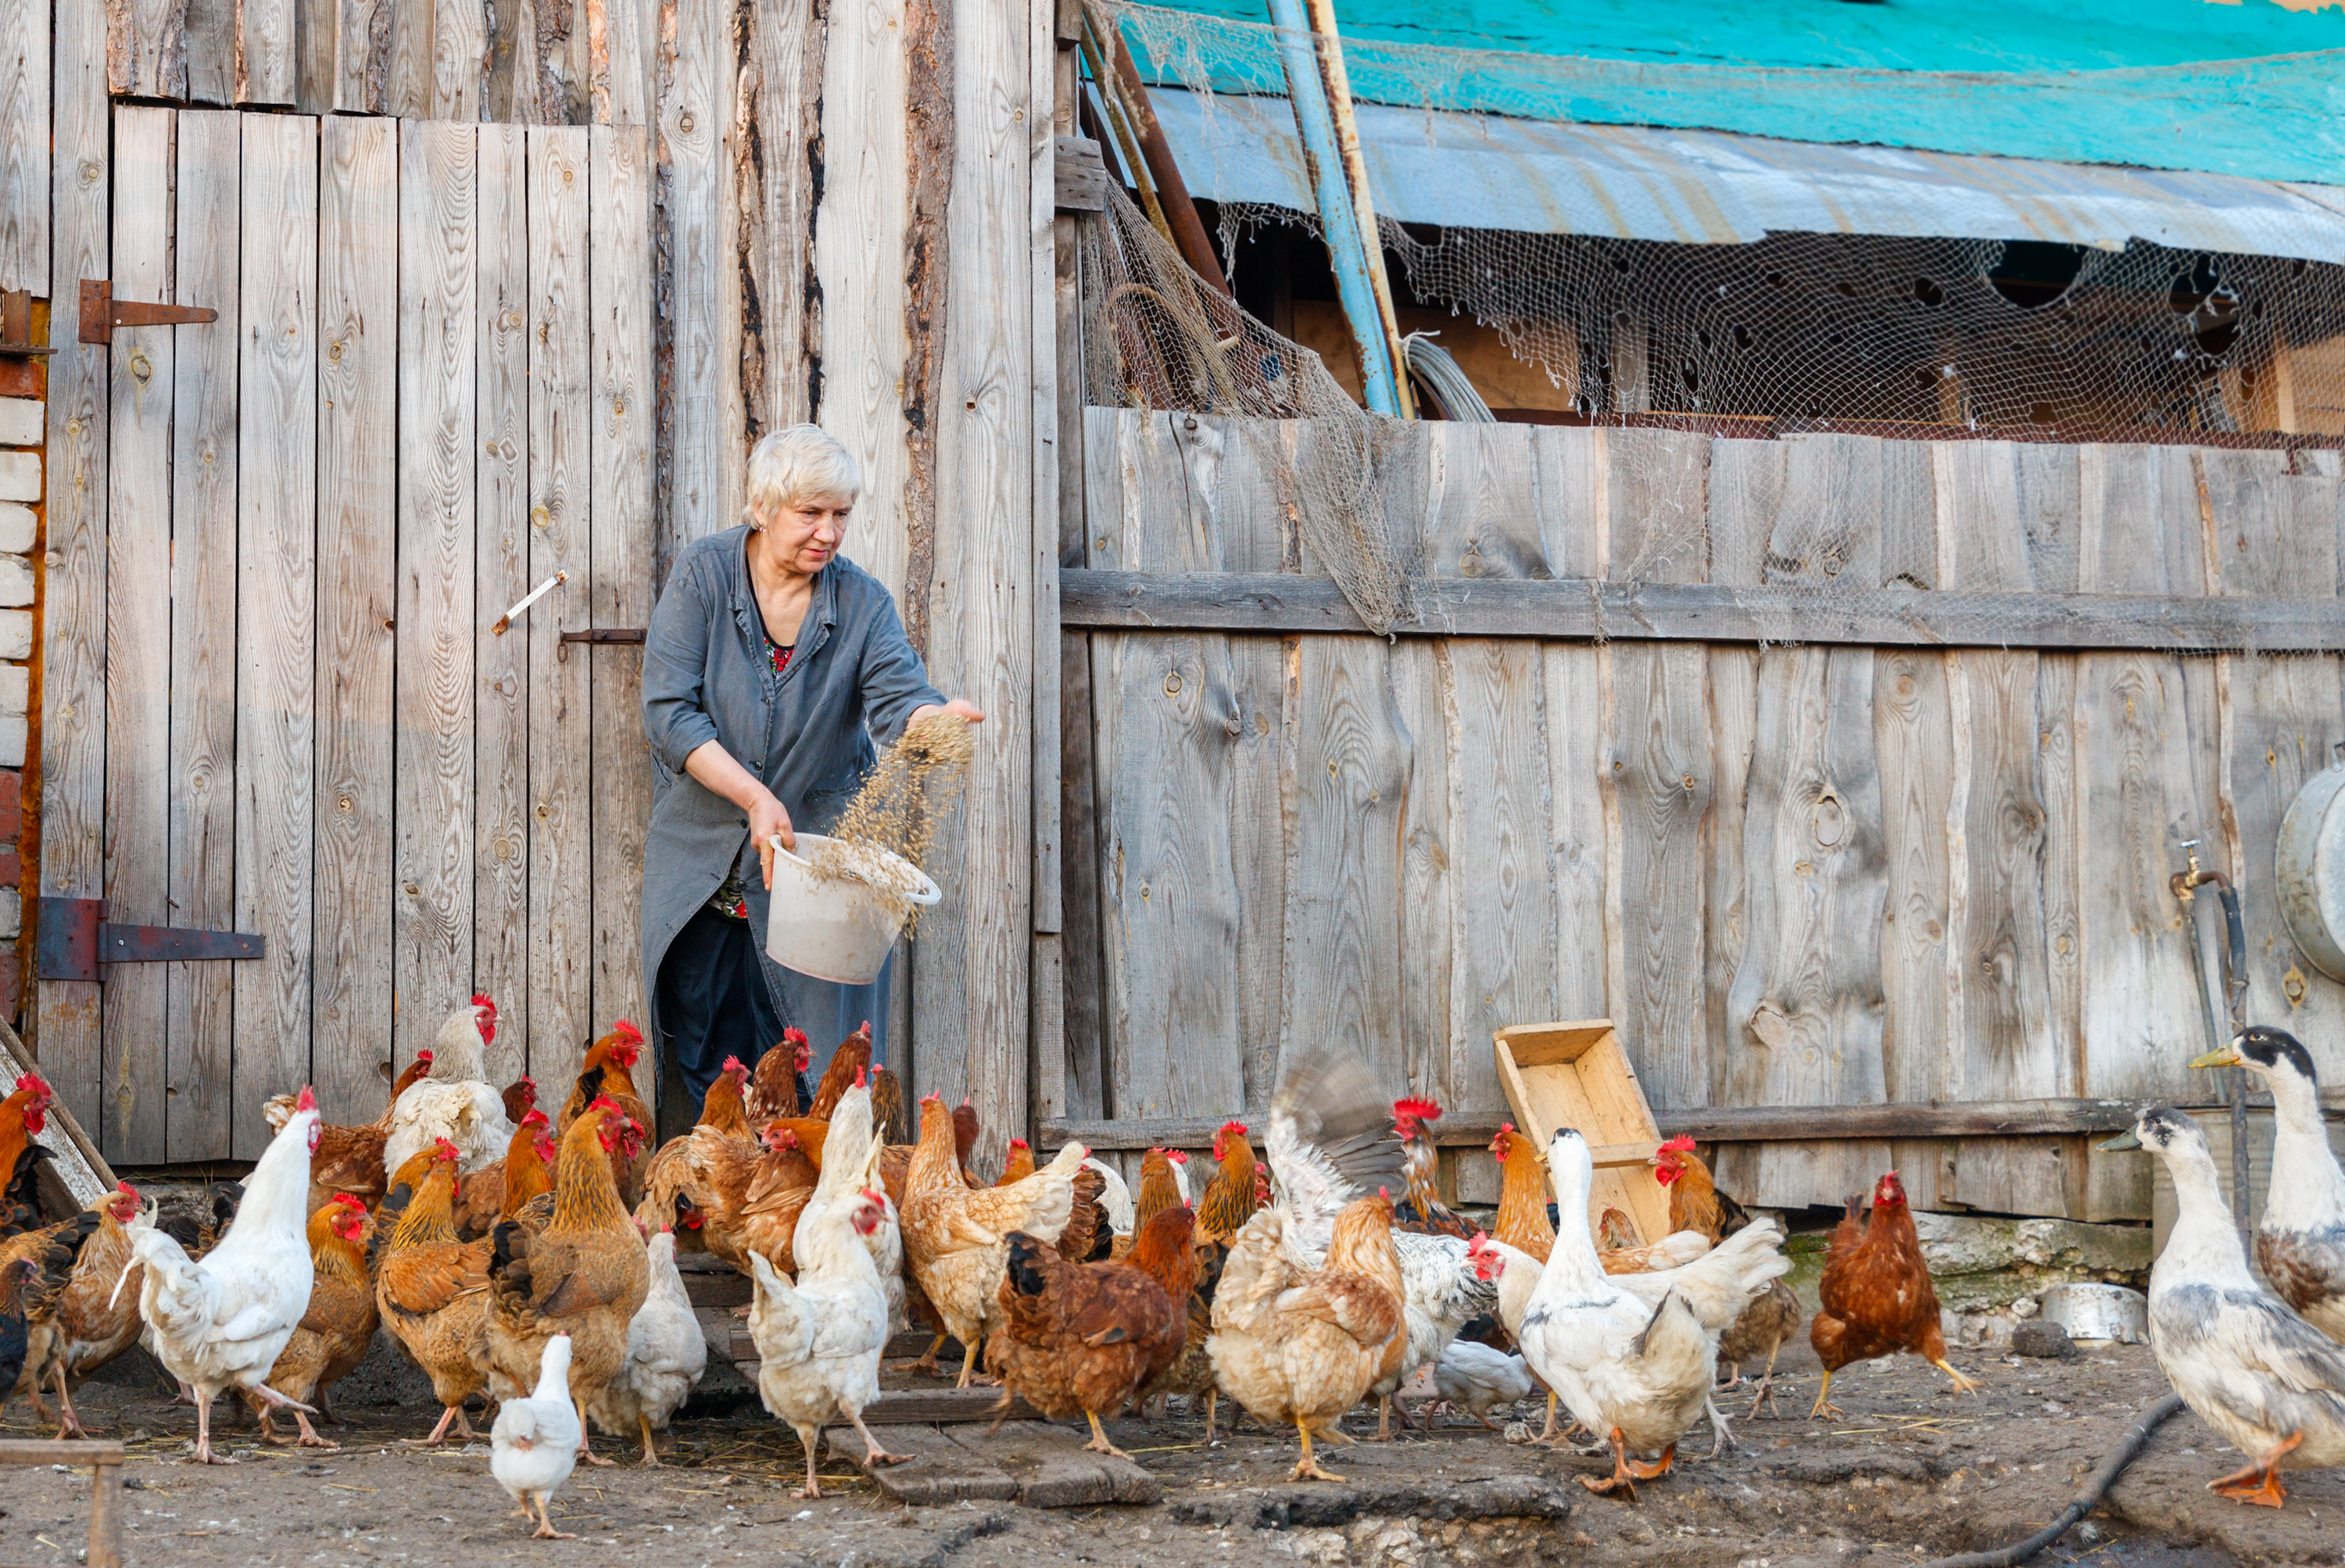 Even though backyard keepers can keep their birds on a dirt patch, using poultry litter can help make manure management easier